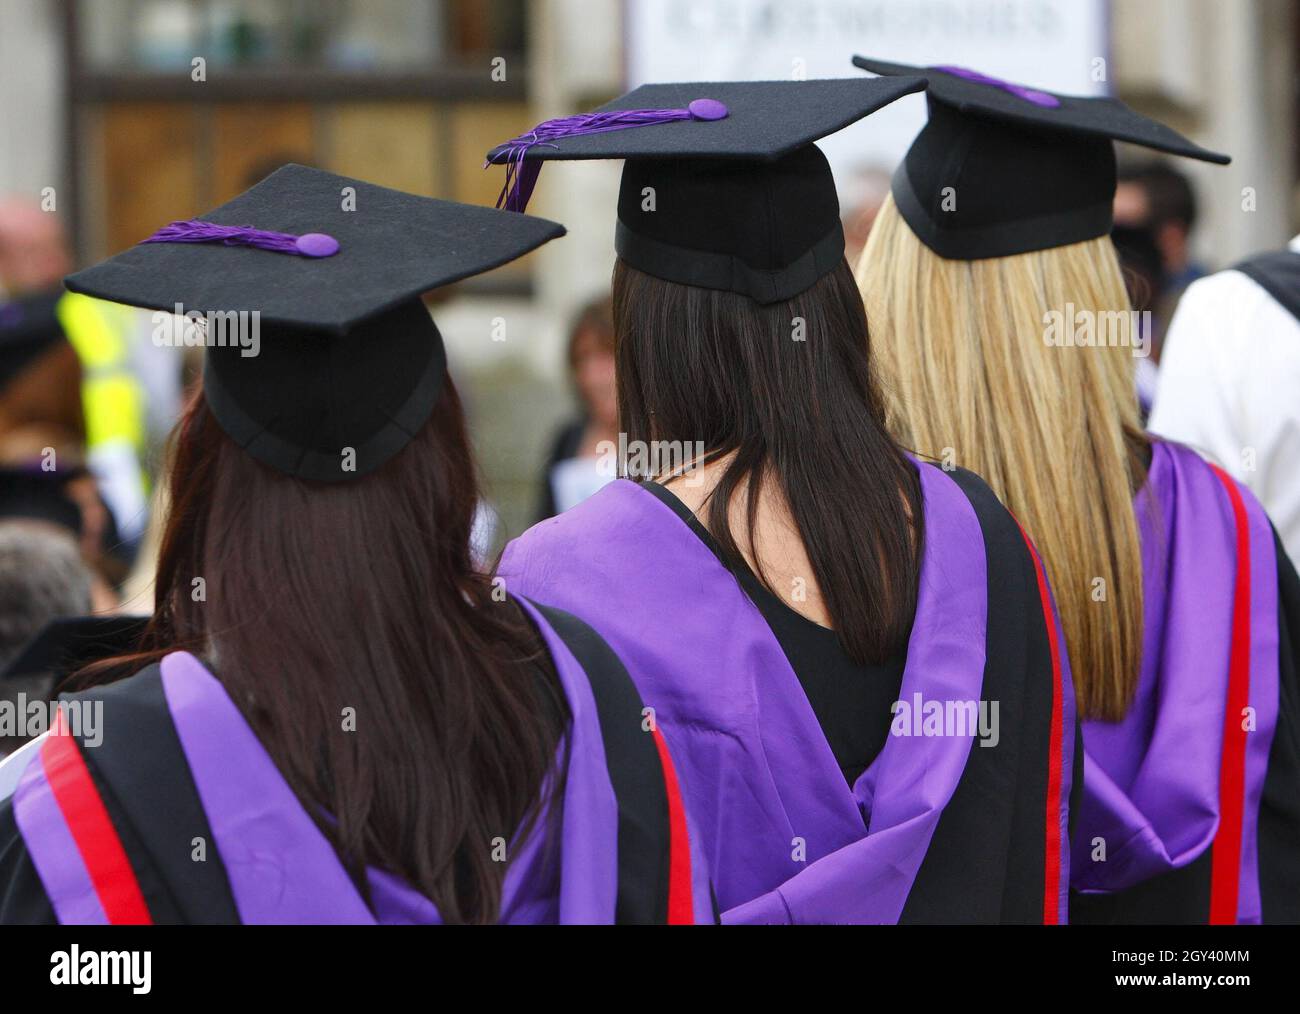 File photo dated 16/07/08 of university graduates. England's higher education watchdog has warned, universities should not disregard poor spelling, punctuation and grammar when marking exams and assessments as it could lead to inflated grades. Stock Photo